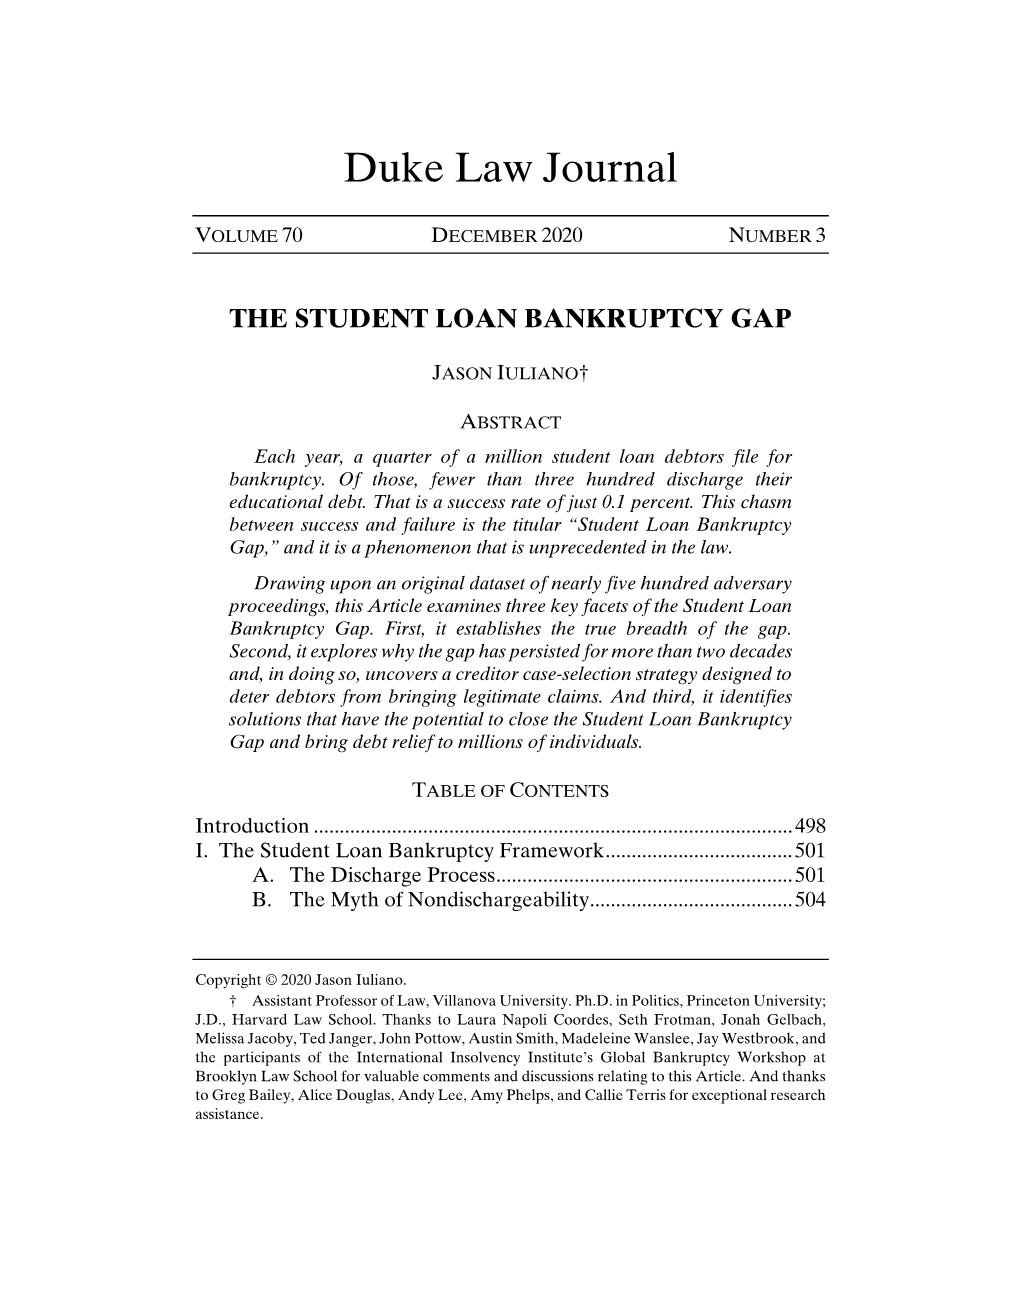 The Student Loan Bankruptcy Gap